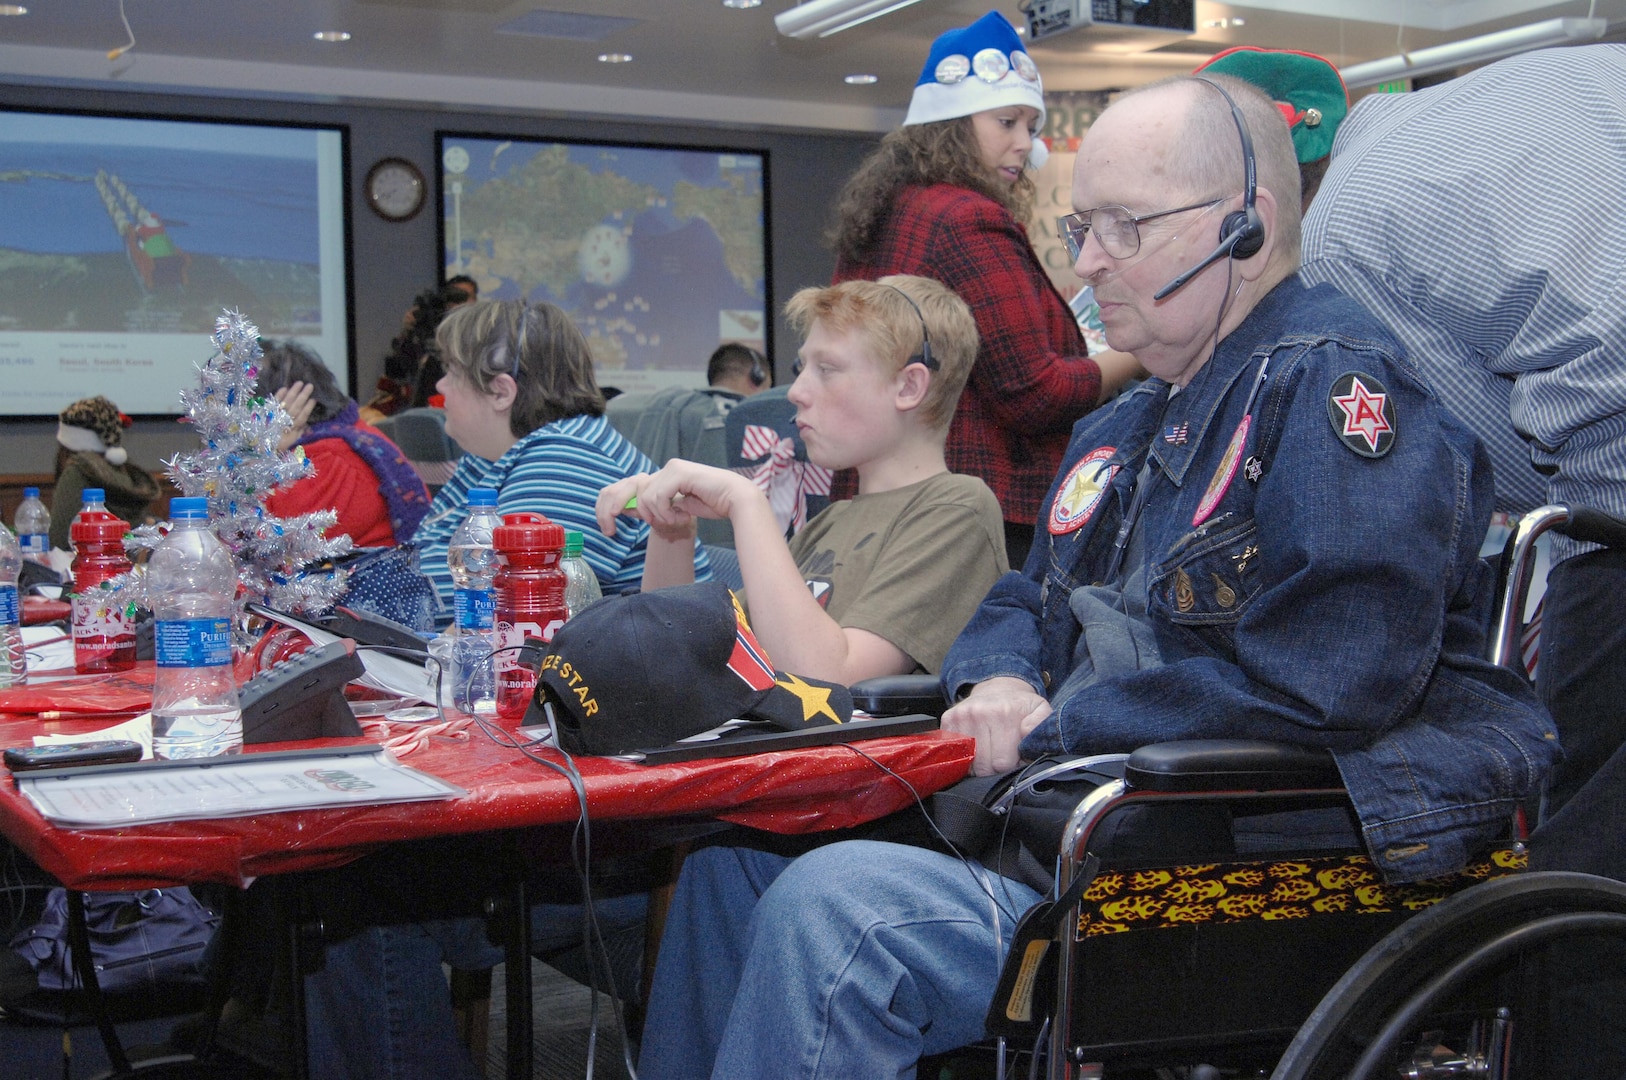 PETERSON AIR FORCE BASE, Colo. - James H. Mulhern, U.S. Army retired, takes calls at the NORAD Tracks Santa Operations Center on Peterson Air Force Base Christmas Eve. Mulhern was a tank commander in Vietnam with the 1st Infantry Division and served in the U.S. Army from 1963 to 1983. (U.S. Air Force photo by Tech. Sgt. Thomas J. Doscher)
